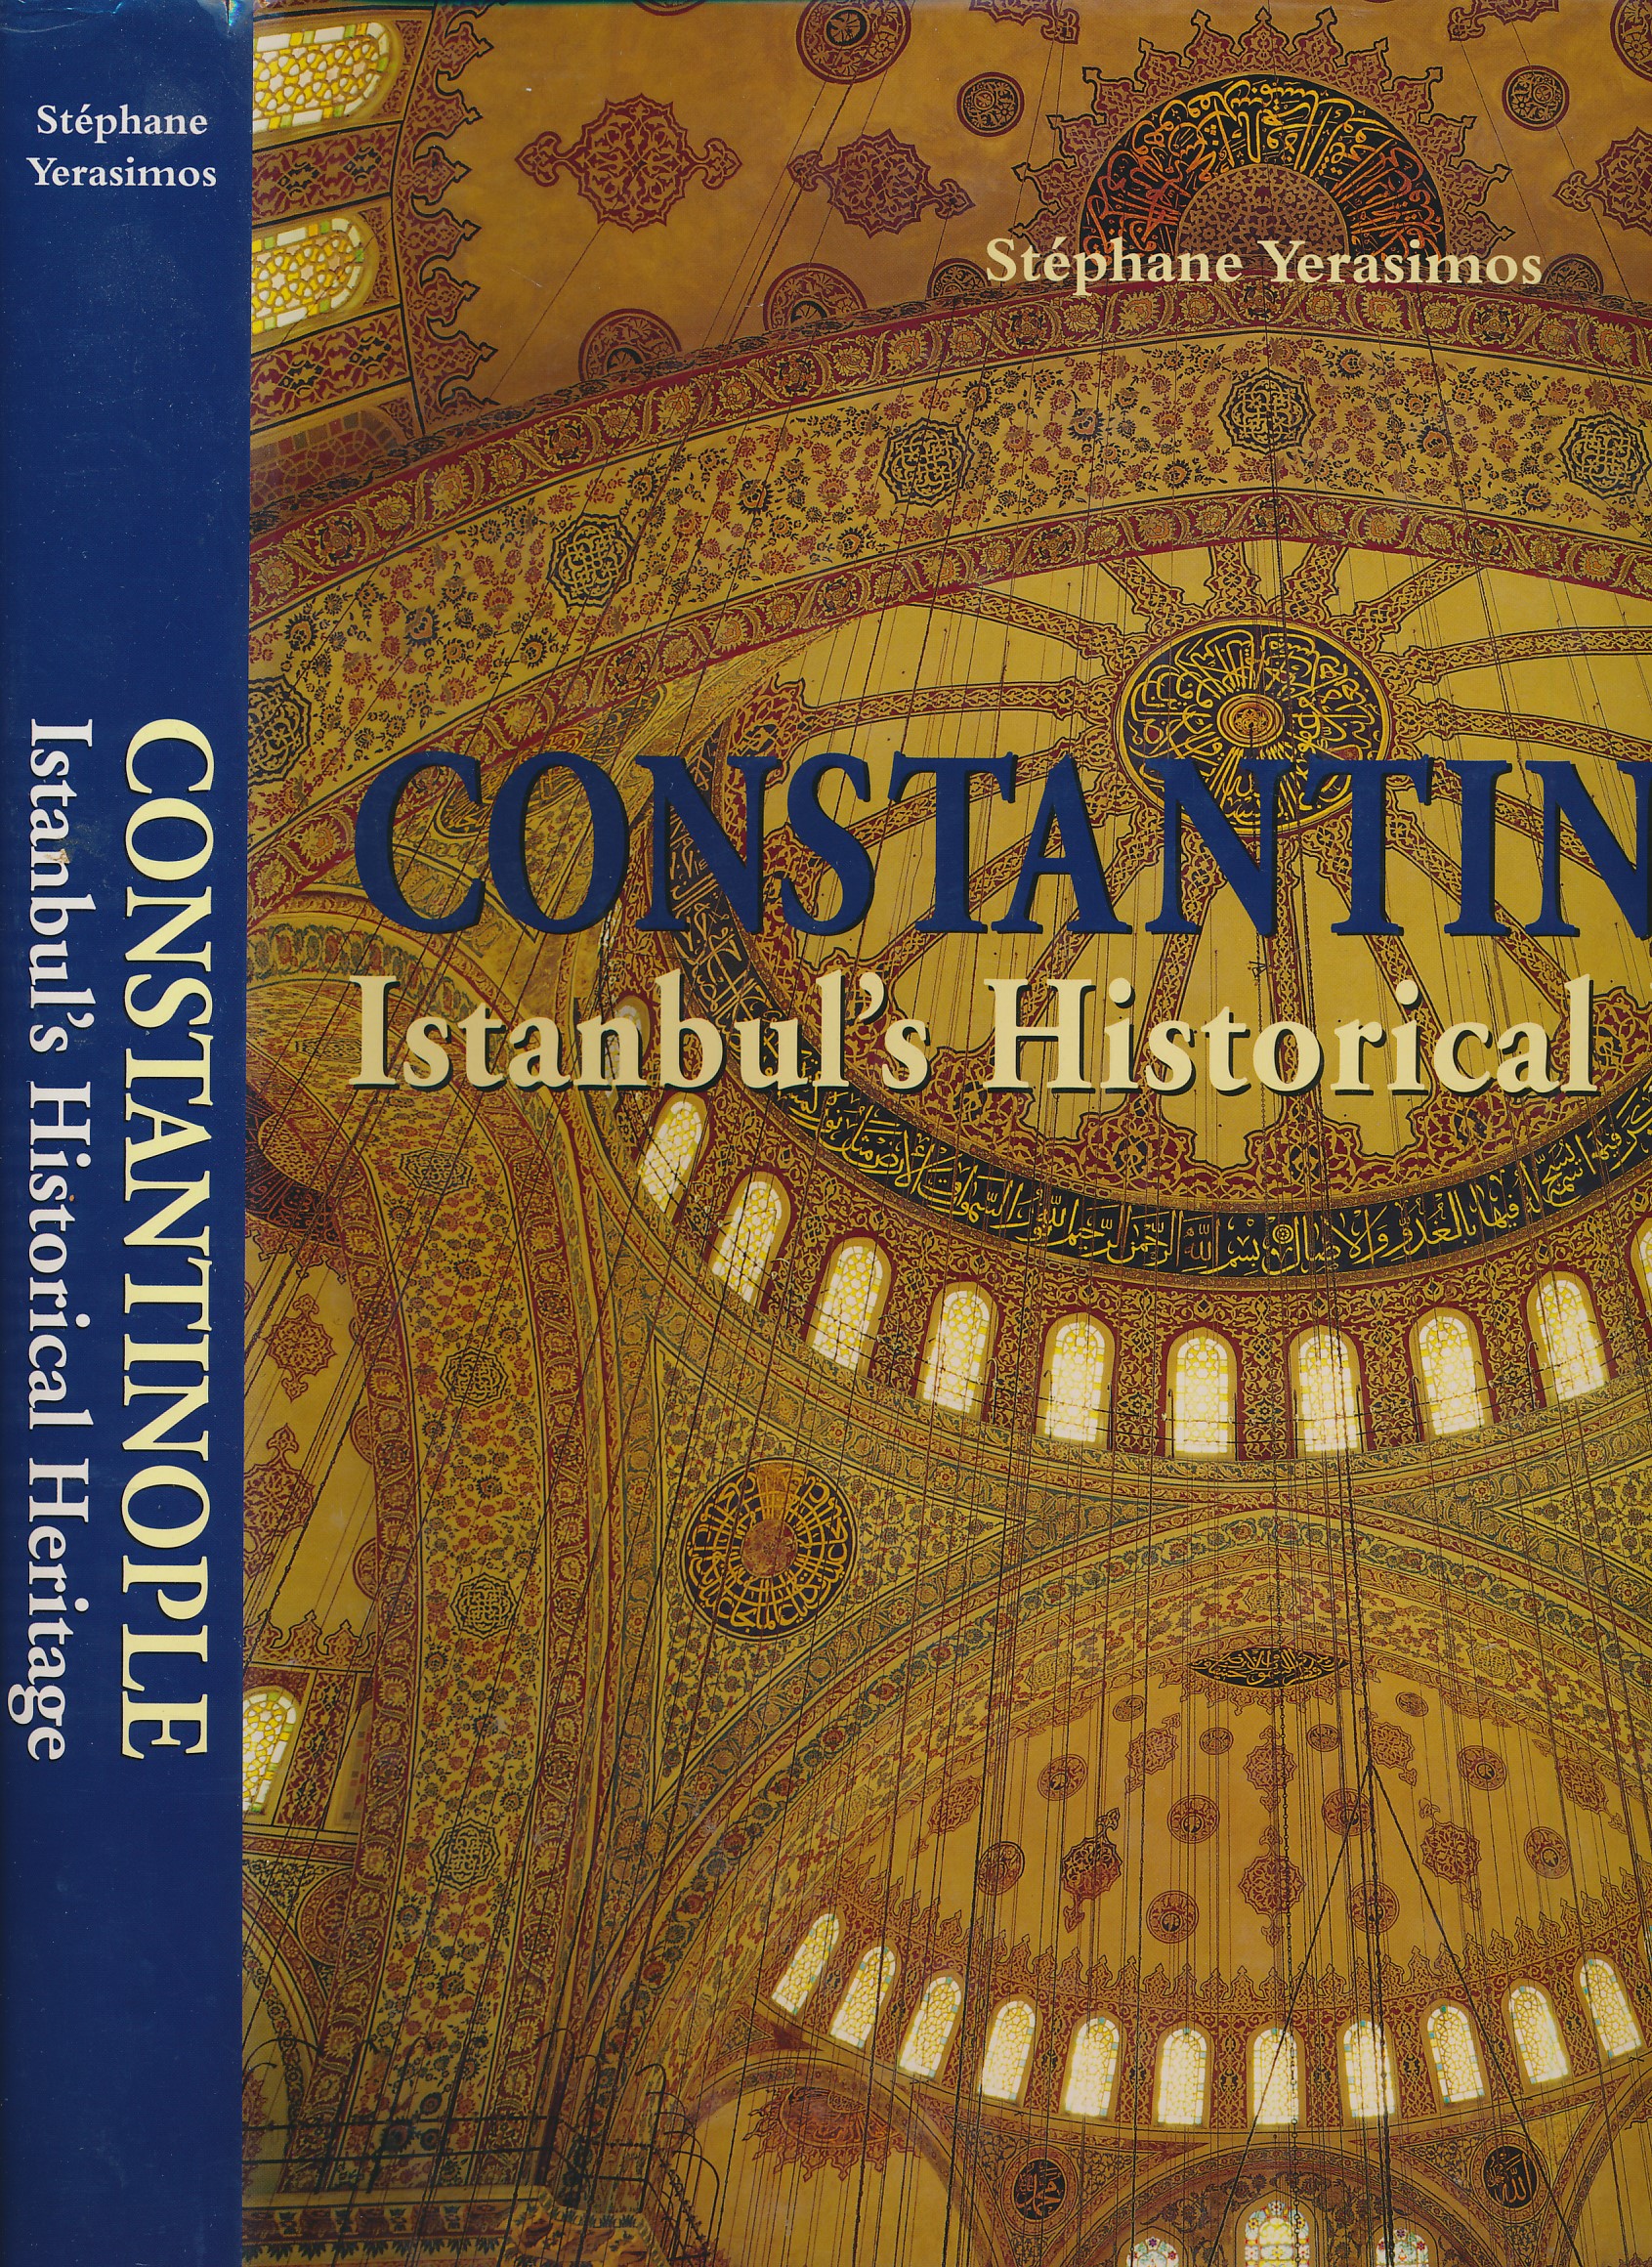 Constantinople Istanbul's Historical Heritage